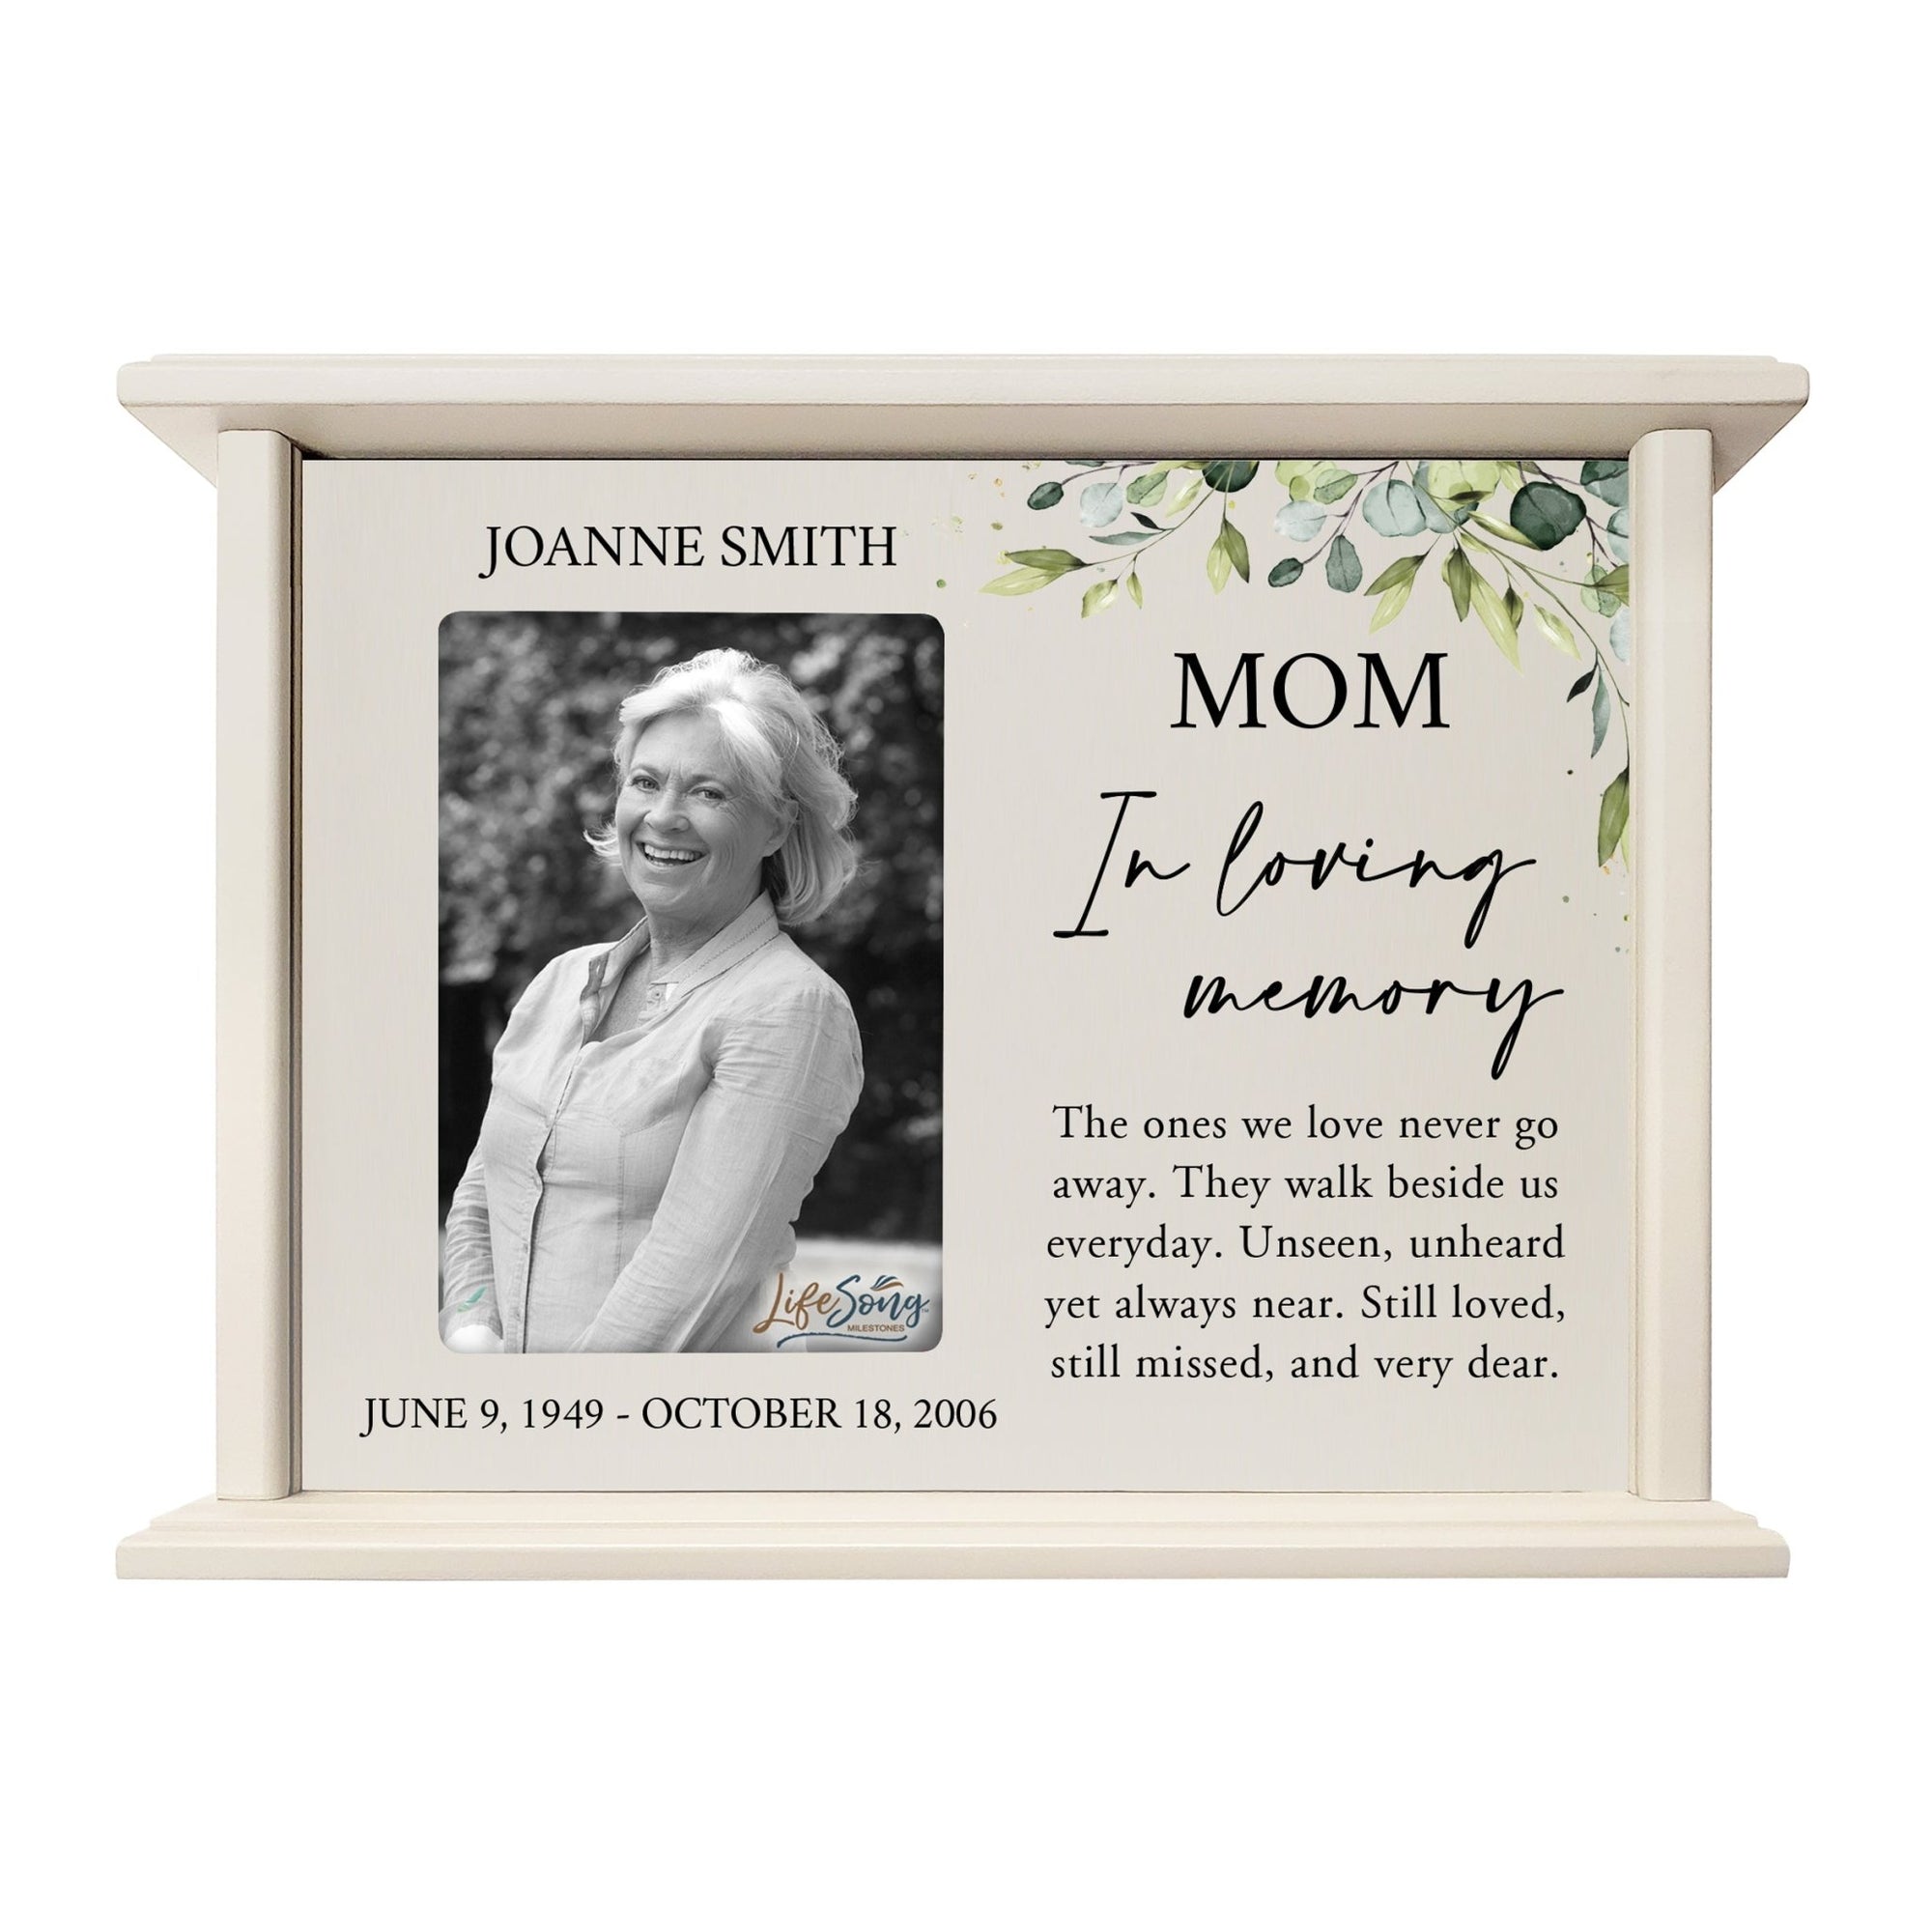 Personalized Memorial Cherry Wood 12 x 4.5 x 9 Cremation Urn Box with Picture Frame holds 200 cu in of Human Ashes and 4x6 Photo - In Loving Memory (Ivory) - LifeSong Milestones